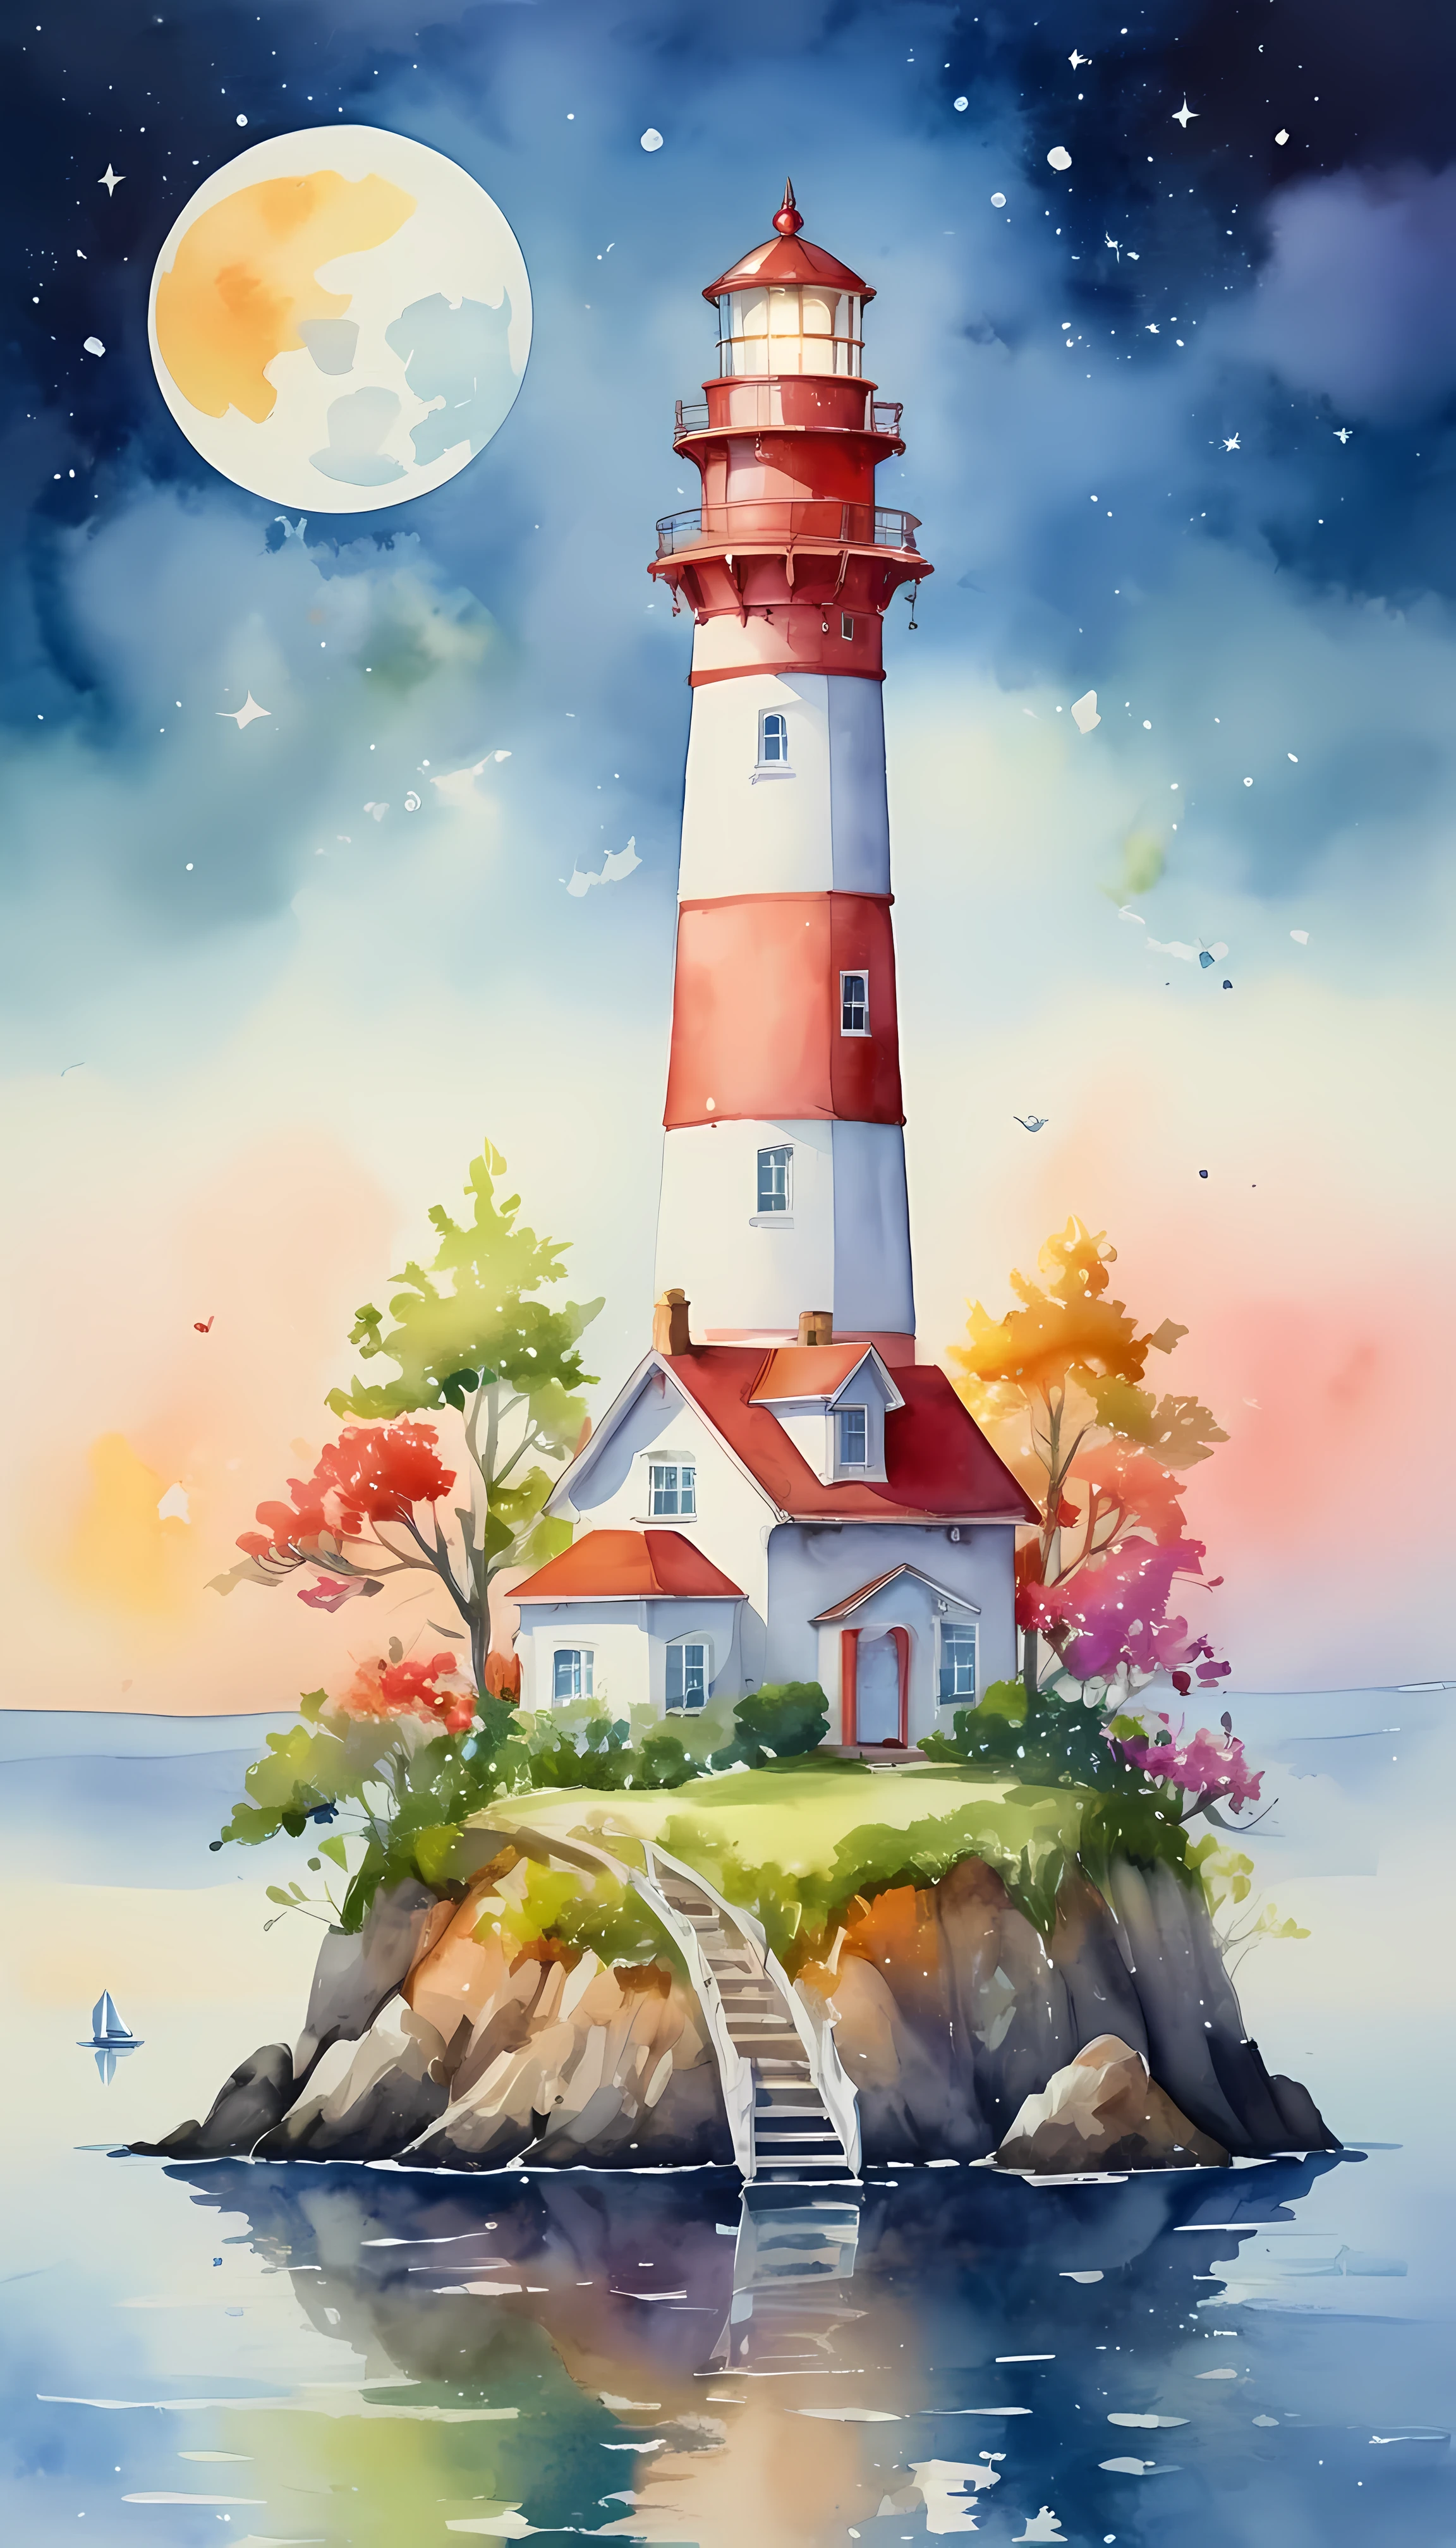 CuteCartoonAF, Cute Cartoon, masterpiece in maximum 16K resolution, superb quality, a whimsical tall lighthouse on a floating big island, the lighthouse has playful design, the floating island has colorful flowers and whimsical trees, night sky with winkling stars, a shooting star, a crescent moon, dreamy color palette. | ((More_Detail))